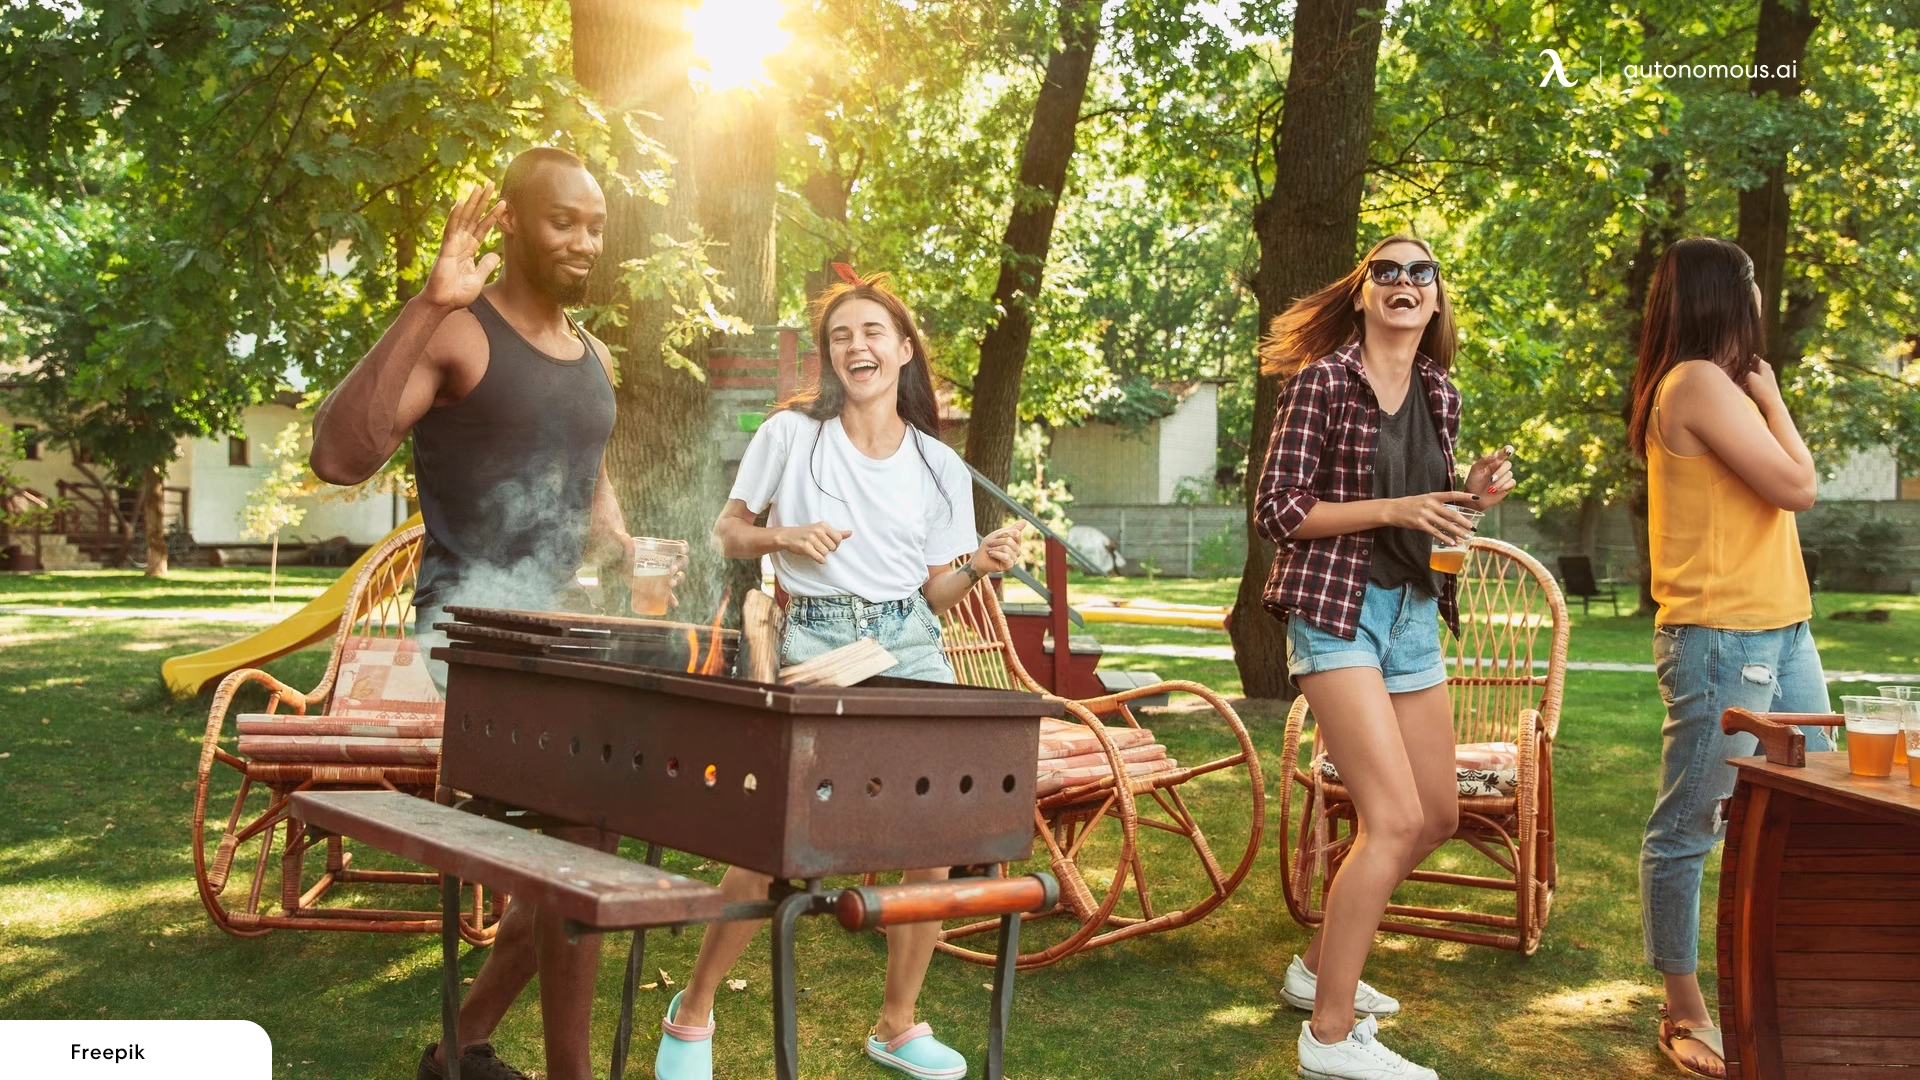 Have a Barbeque - things to do on Memorial Day